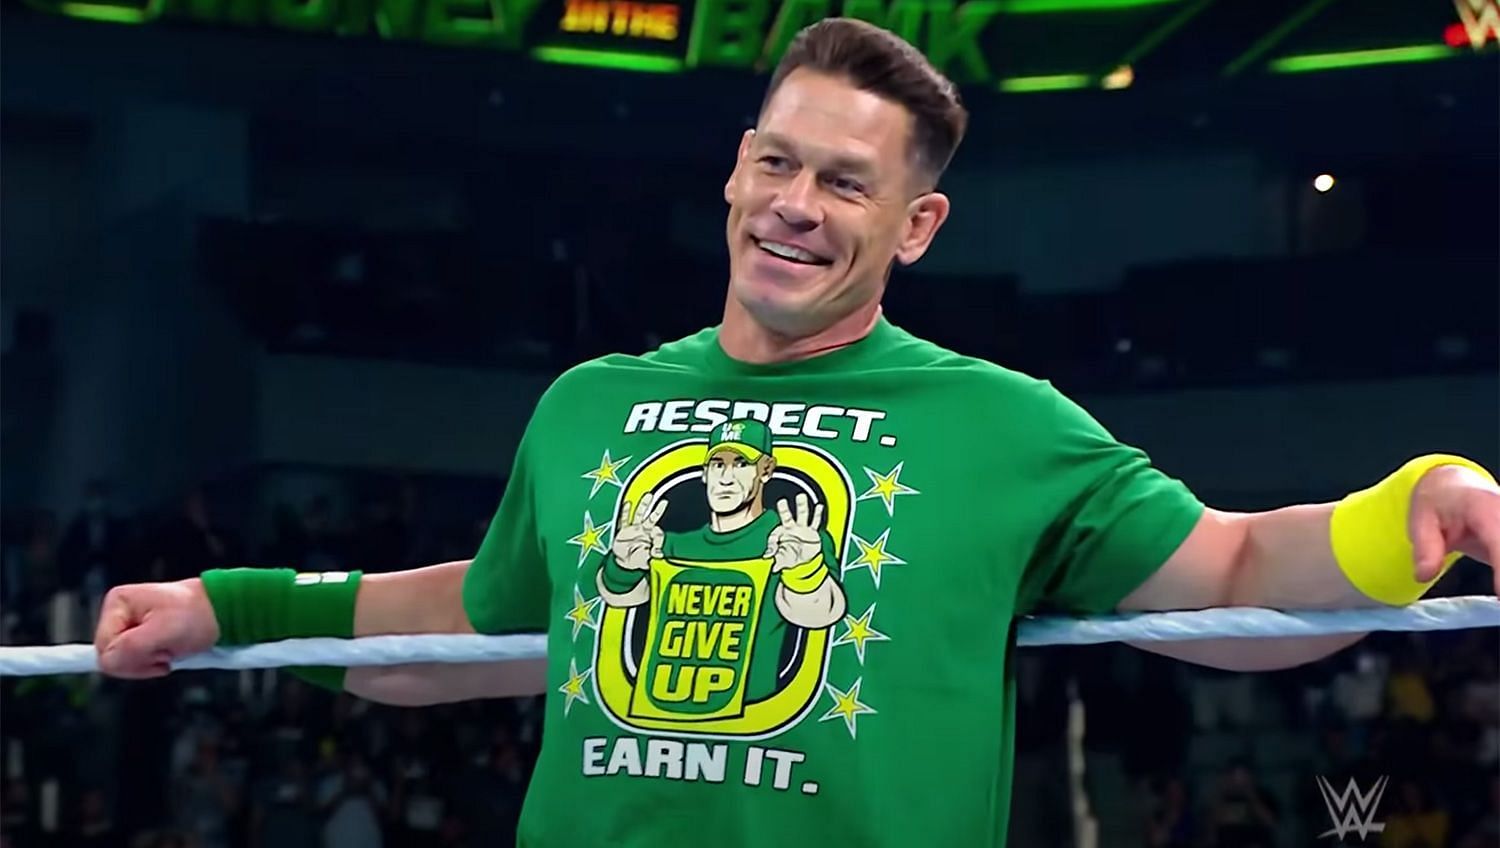 John Cena will return later this month on RAW